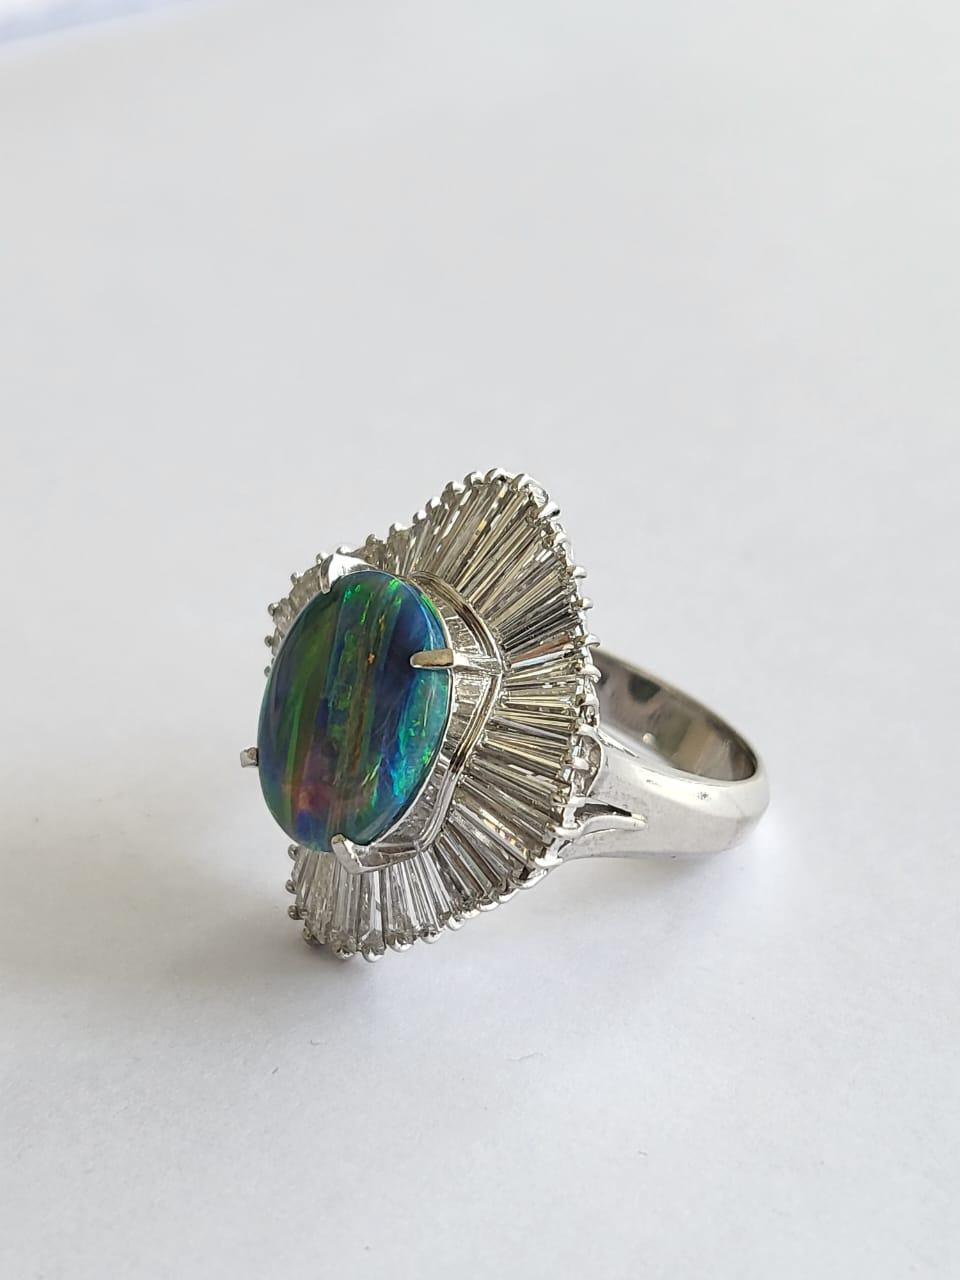 A very beautiful and gorgeous, Opal Engagement Cocktail Ring set in Platinum 900 & Diamonds. The weight of the Opal is 2.34 carats. The Opal is completely natural, without any treatment and is of Australian origin. The Diamonds weight is 2.05